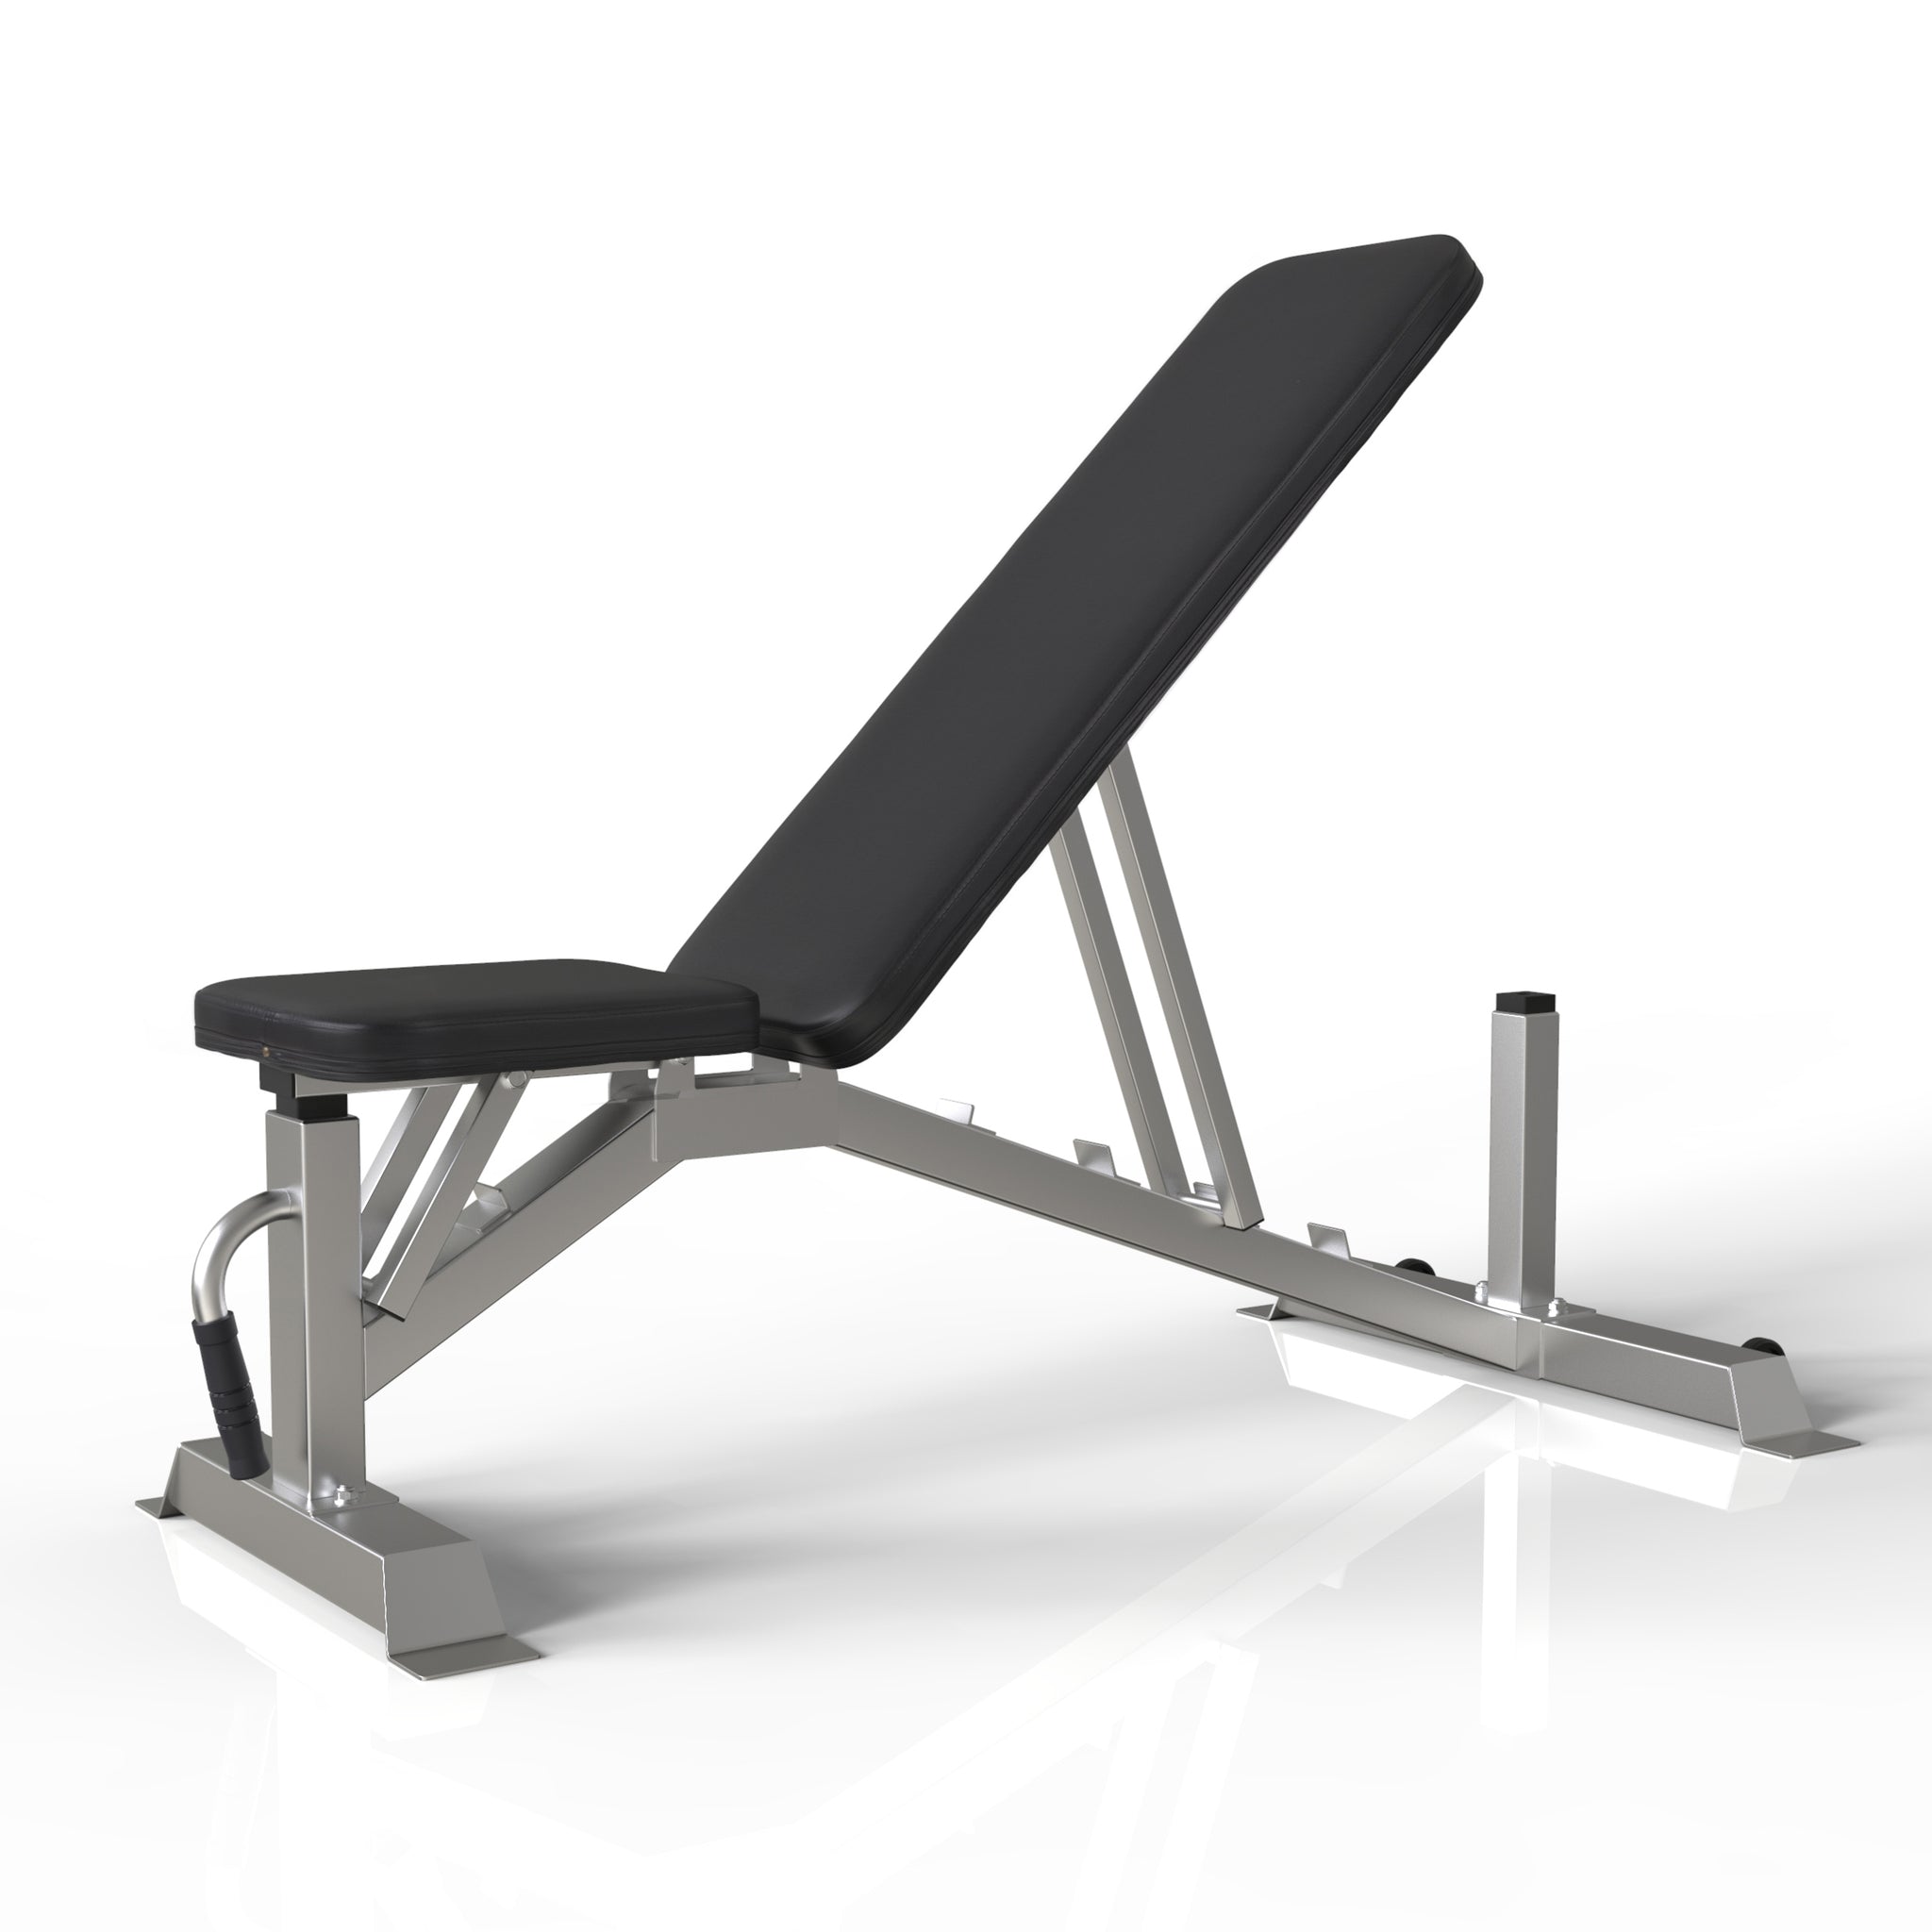 Deluxe Utility Weight Bench for Weightlifting and Strength Training